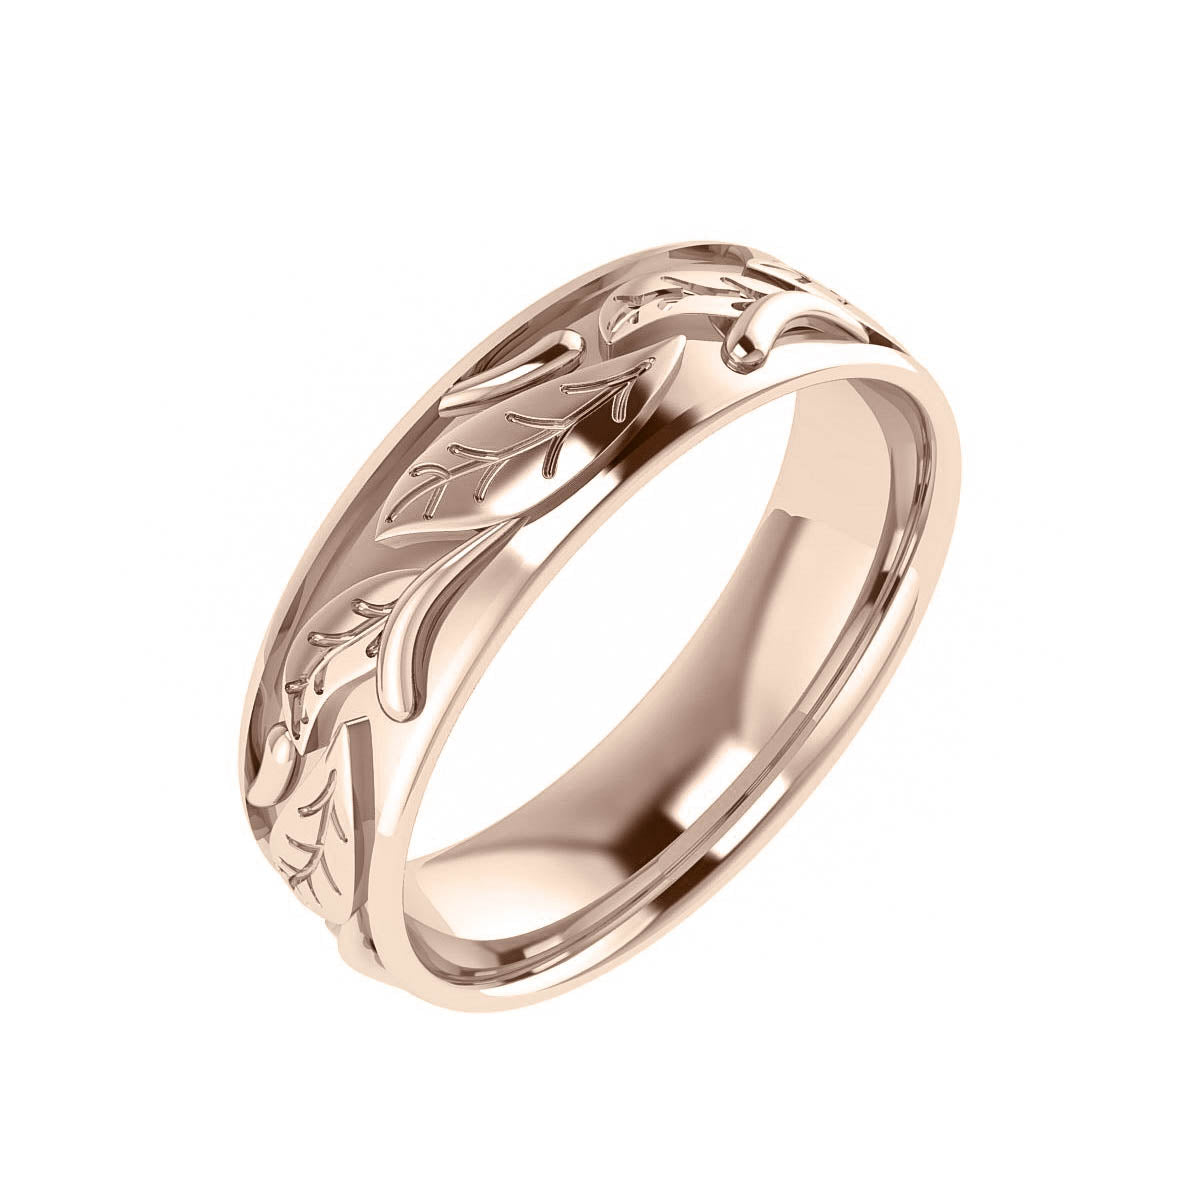 Willow - Gold Tone Stainless Steel Matching Rings | Couples Rings